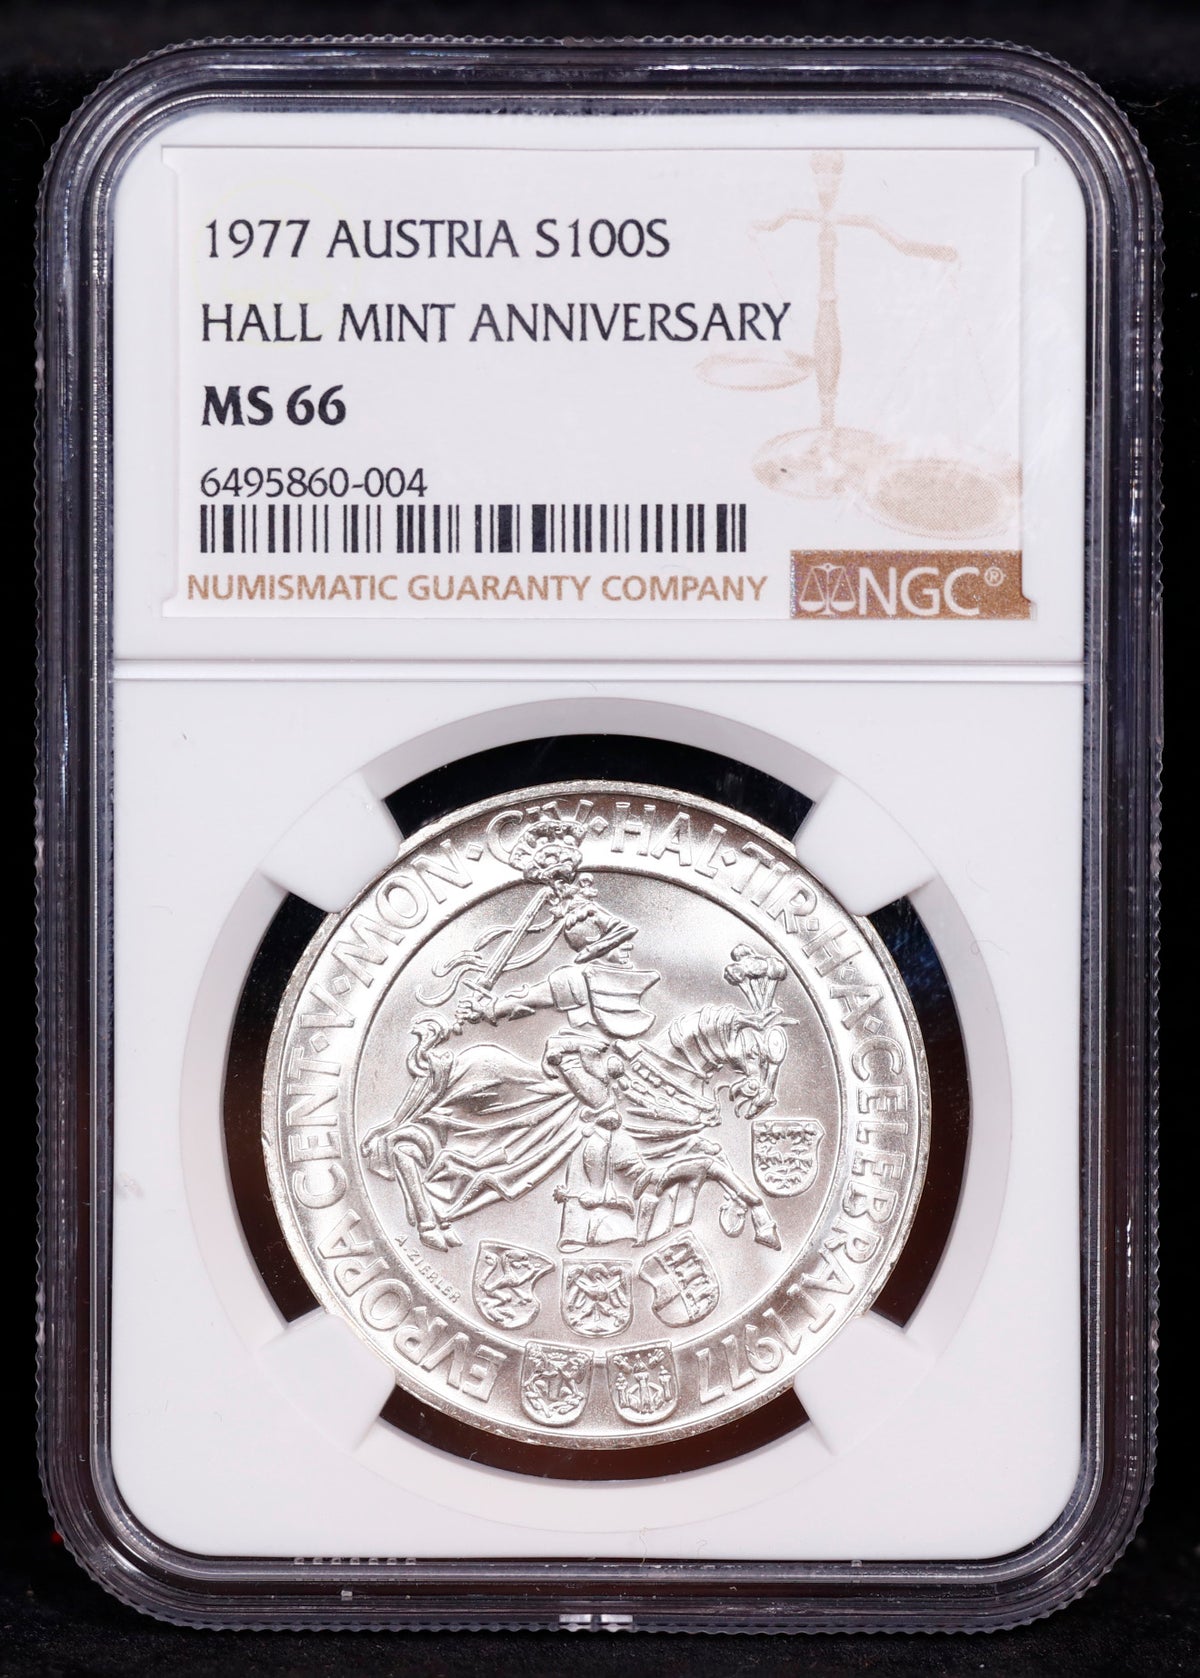 1977 Austria S100S Hall Mint Anniversary NGC MS66 2nd Finest Known